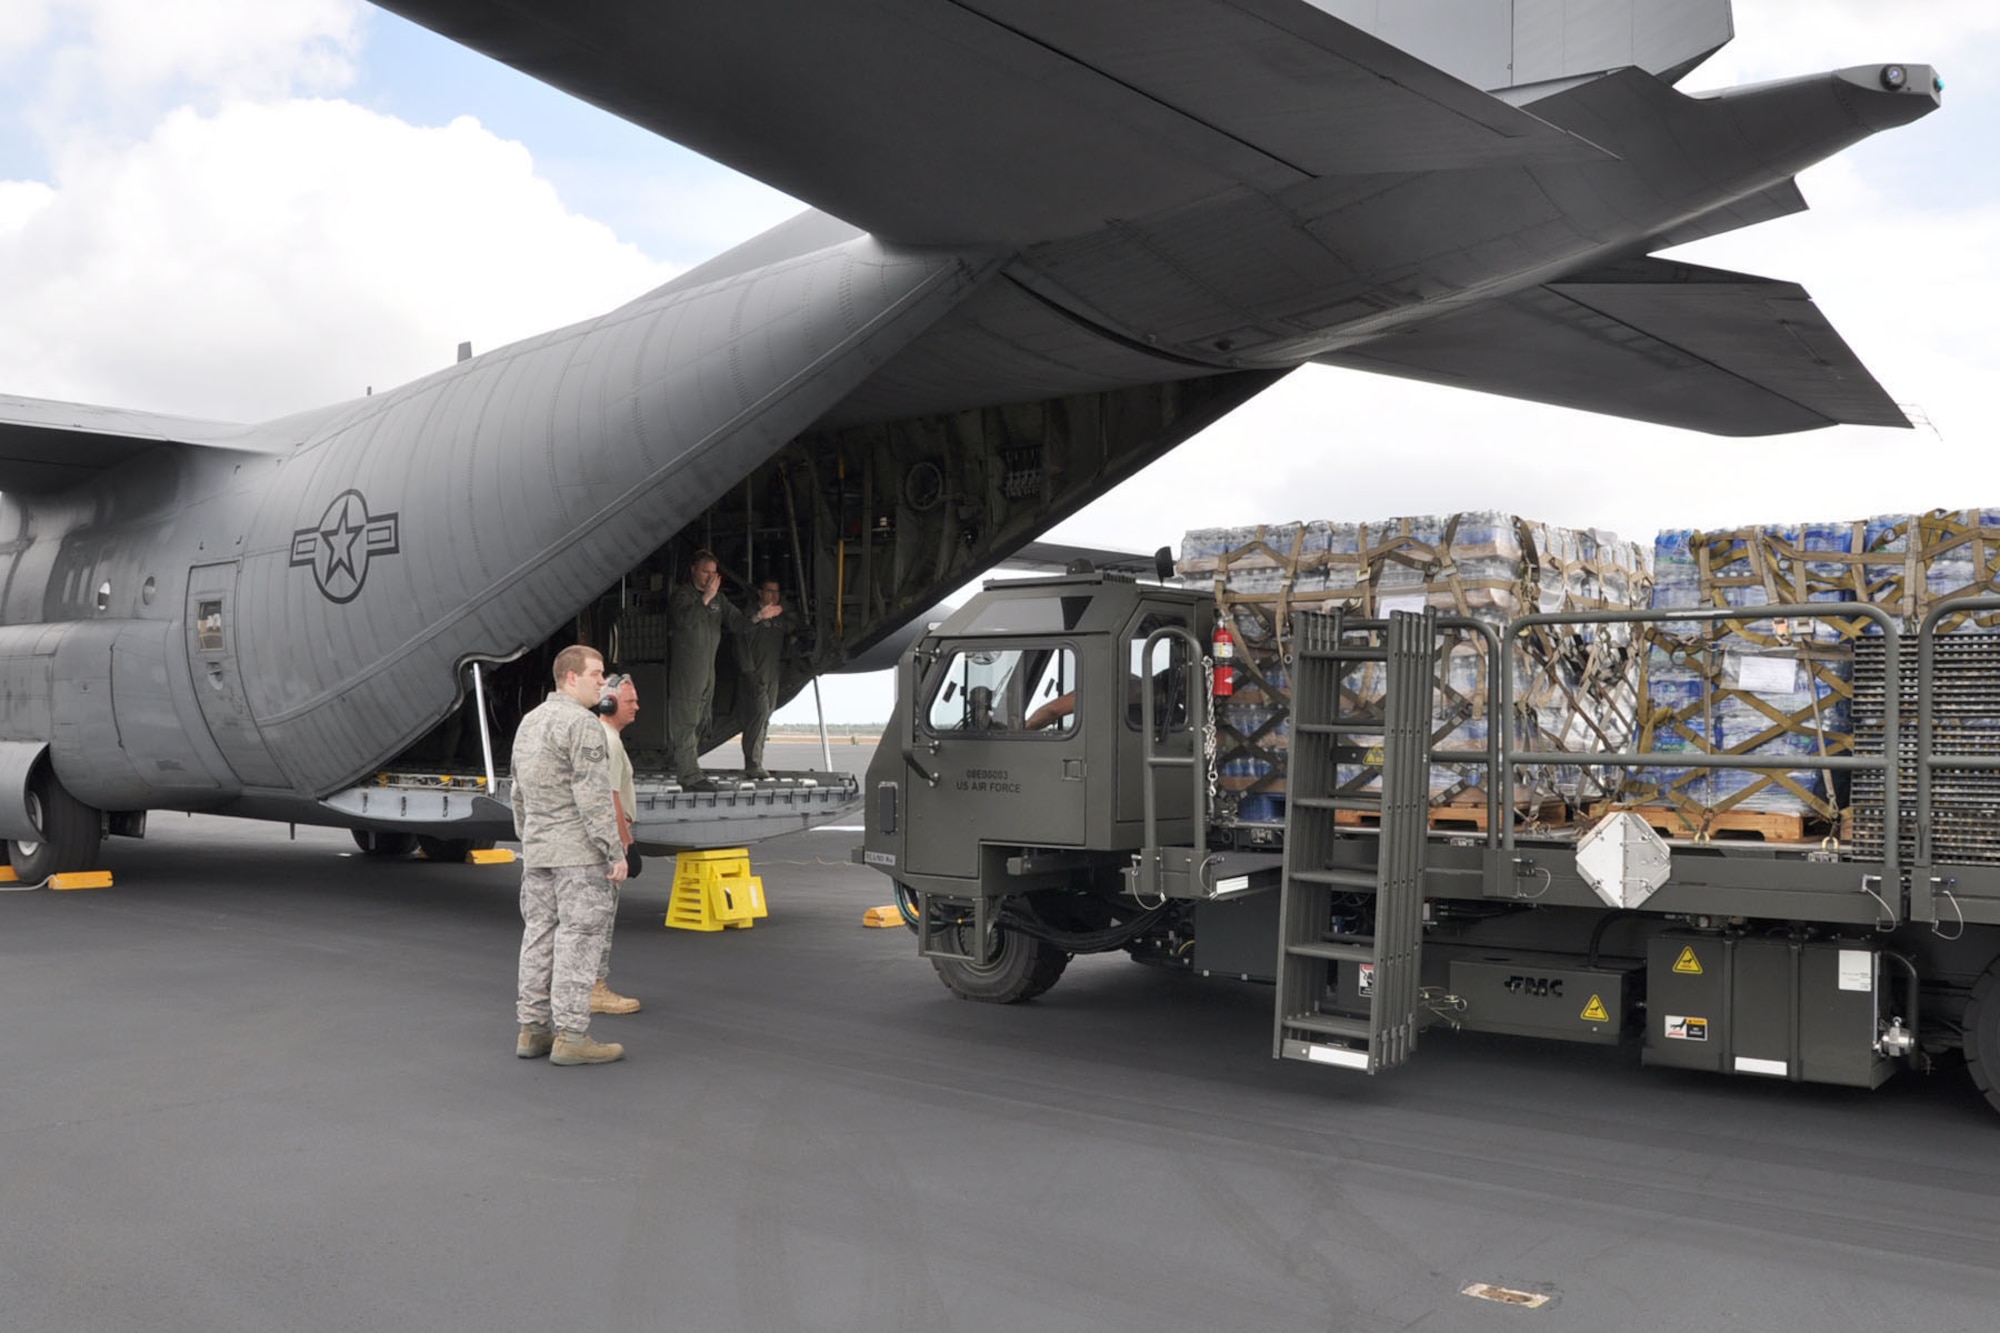 HOMESTEAD AIR RESERVE BASE, Florida -- U.S. Air Force Reserve Master Sgt. Dan Marhulik, a loadmaster assigned to the 910th Airlift Wing, directs a cargo handling vehicle towards the rear of a C-130H Hercules cargo aircraft on the flightline here, January 21. The vehicle is carrying 18,400 pounds of food and water that the aircraft, based at Youngstown Air Reserve Station, Ohio, will carry to San Isidiro Air Base, Dominican Republic, where it will be trucked across the island to Port-au Prince, Haiti as part of the massive international effort to provide relief to the people of the Caribbean island nation in the aftermath of a devastating January 12 earthquake. U.S. Air Force photo by Master Sgt. Bob Barko Jr.